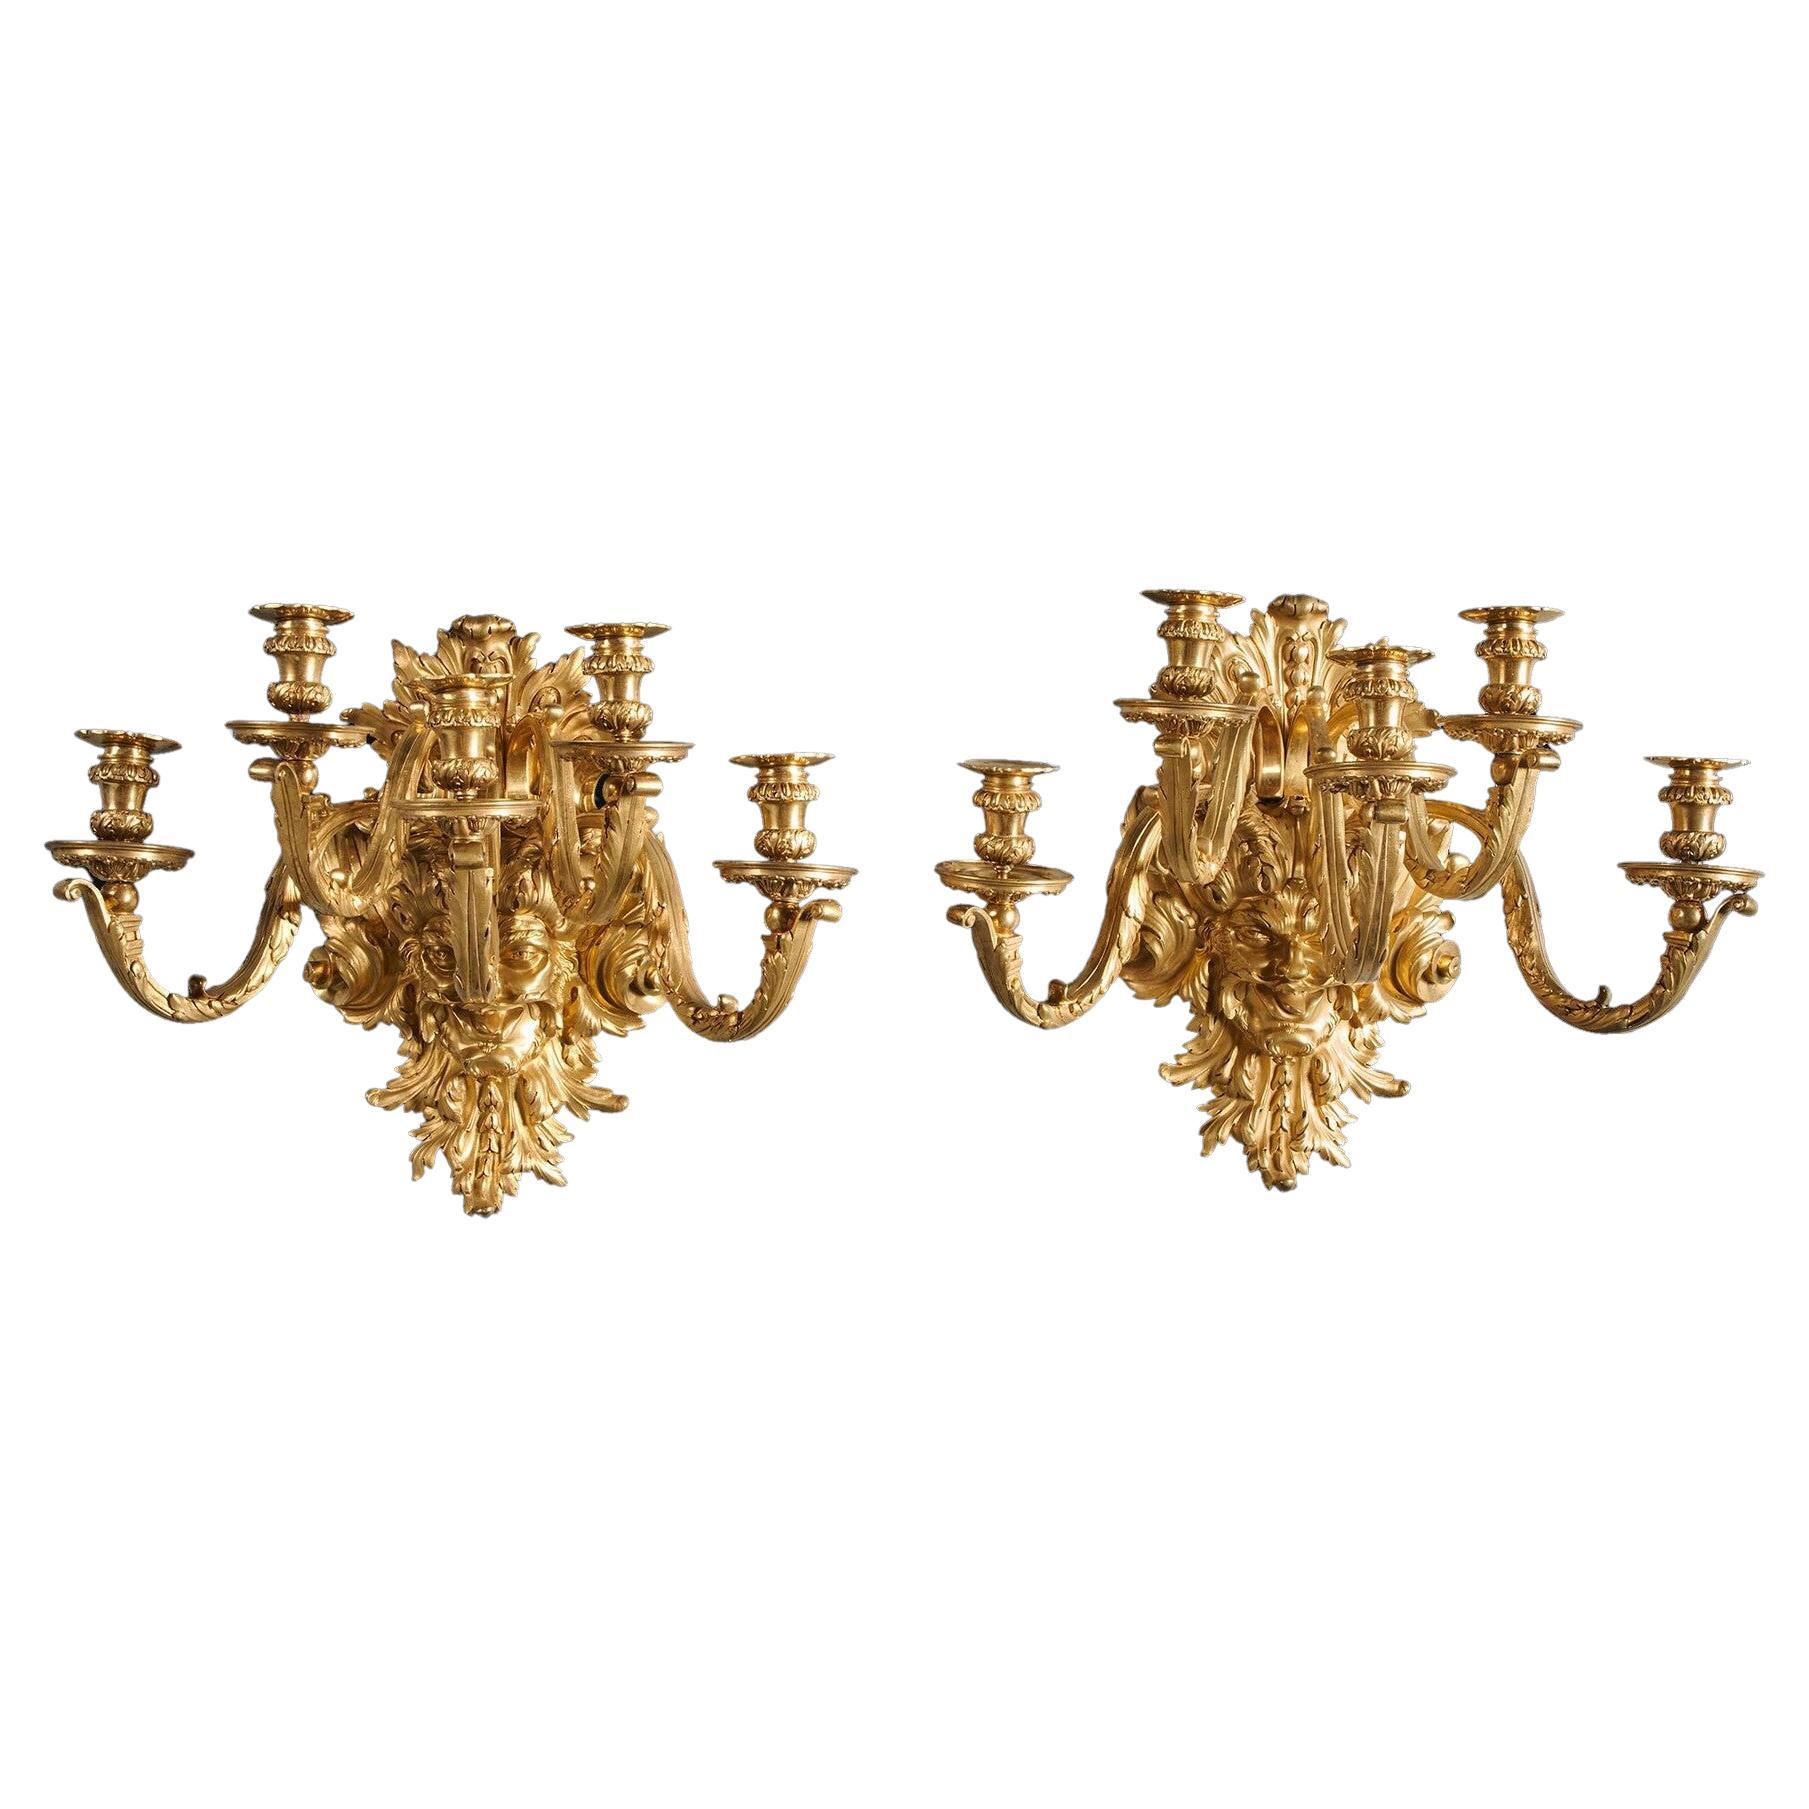 A Fine Pair of French Gilt Bronze Wall Lights Régence Style by Eugène Hazart